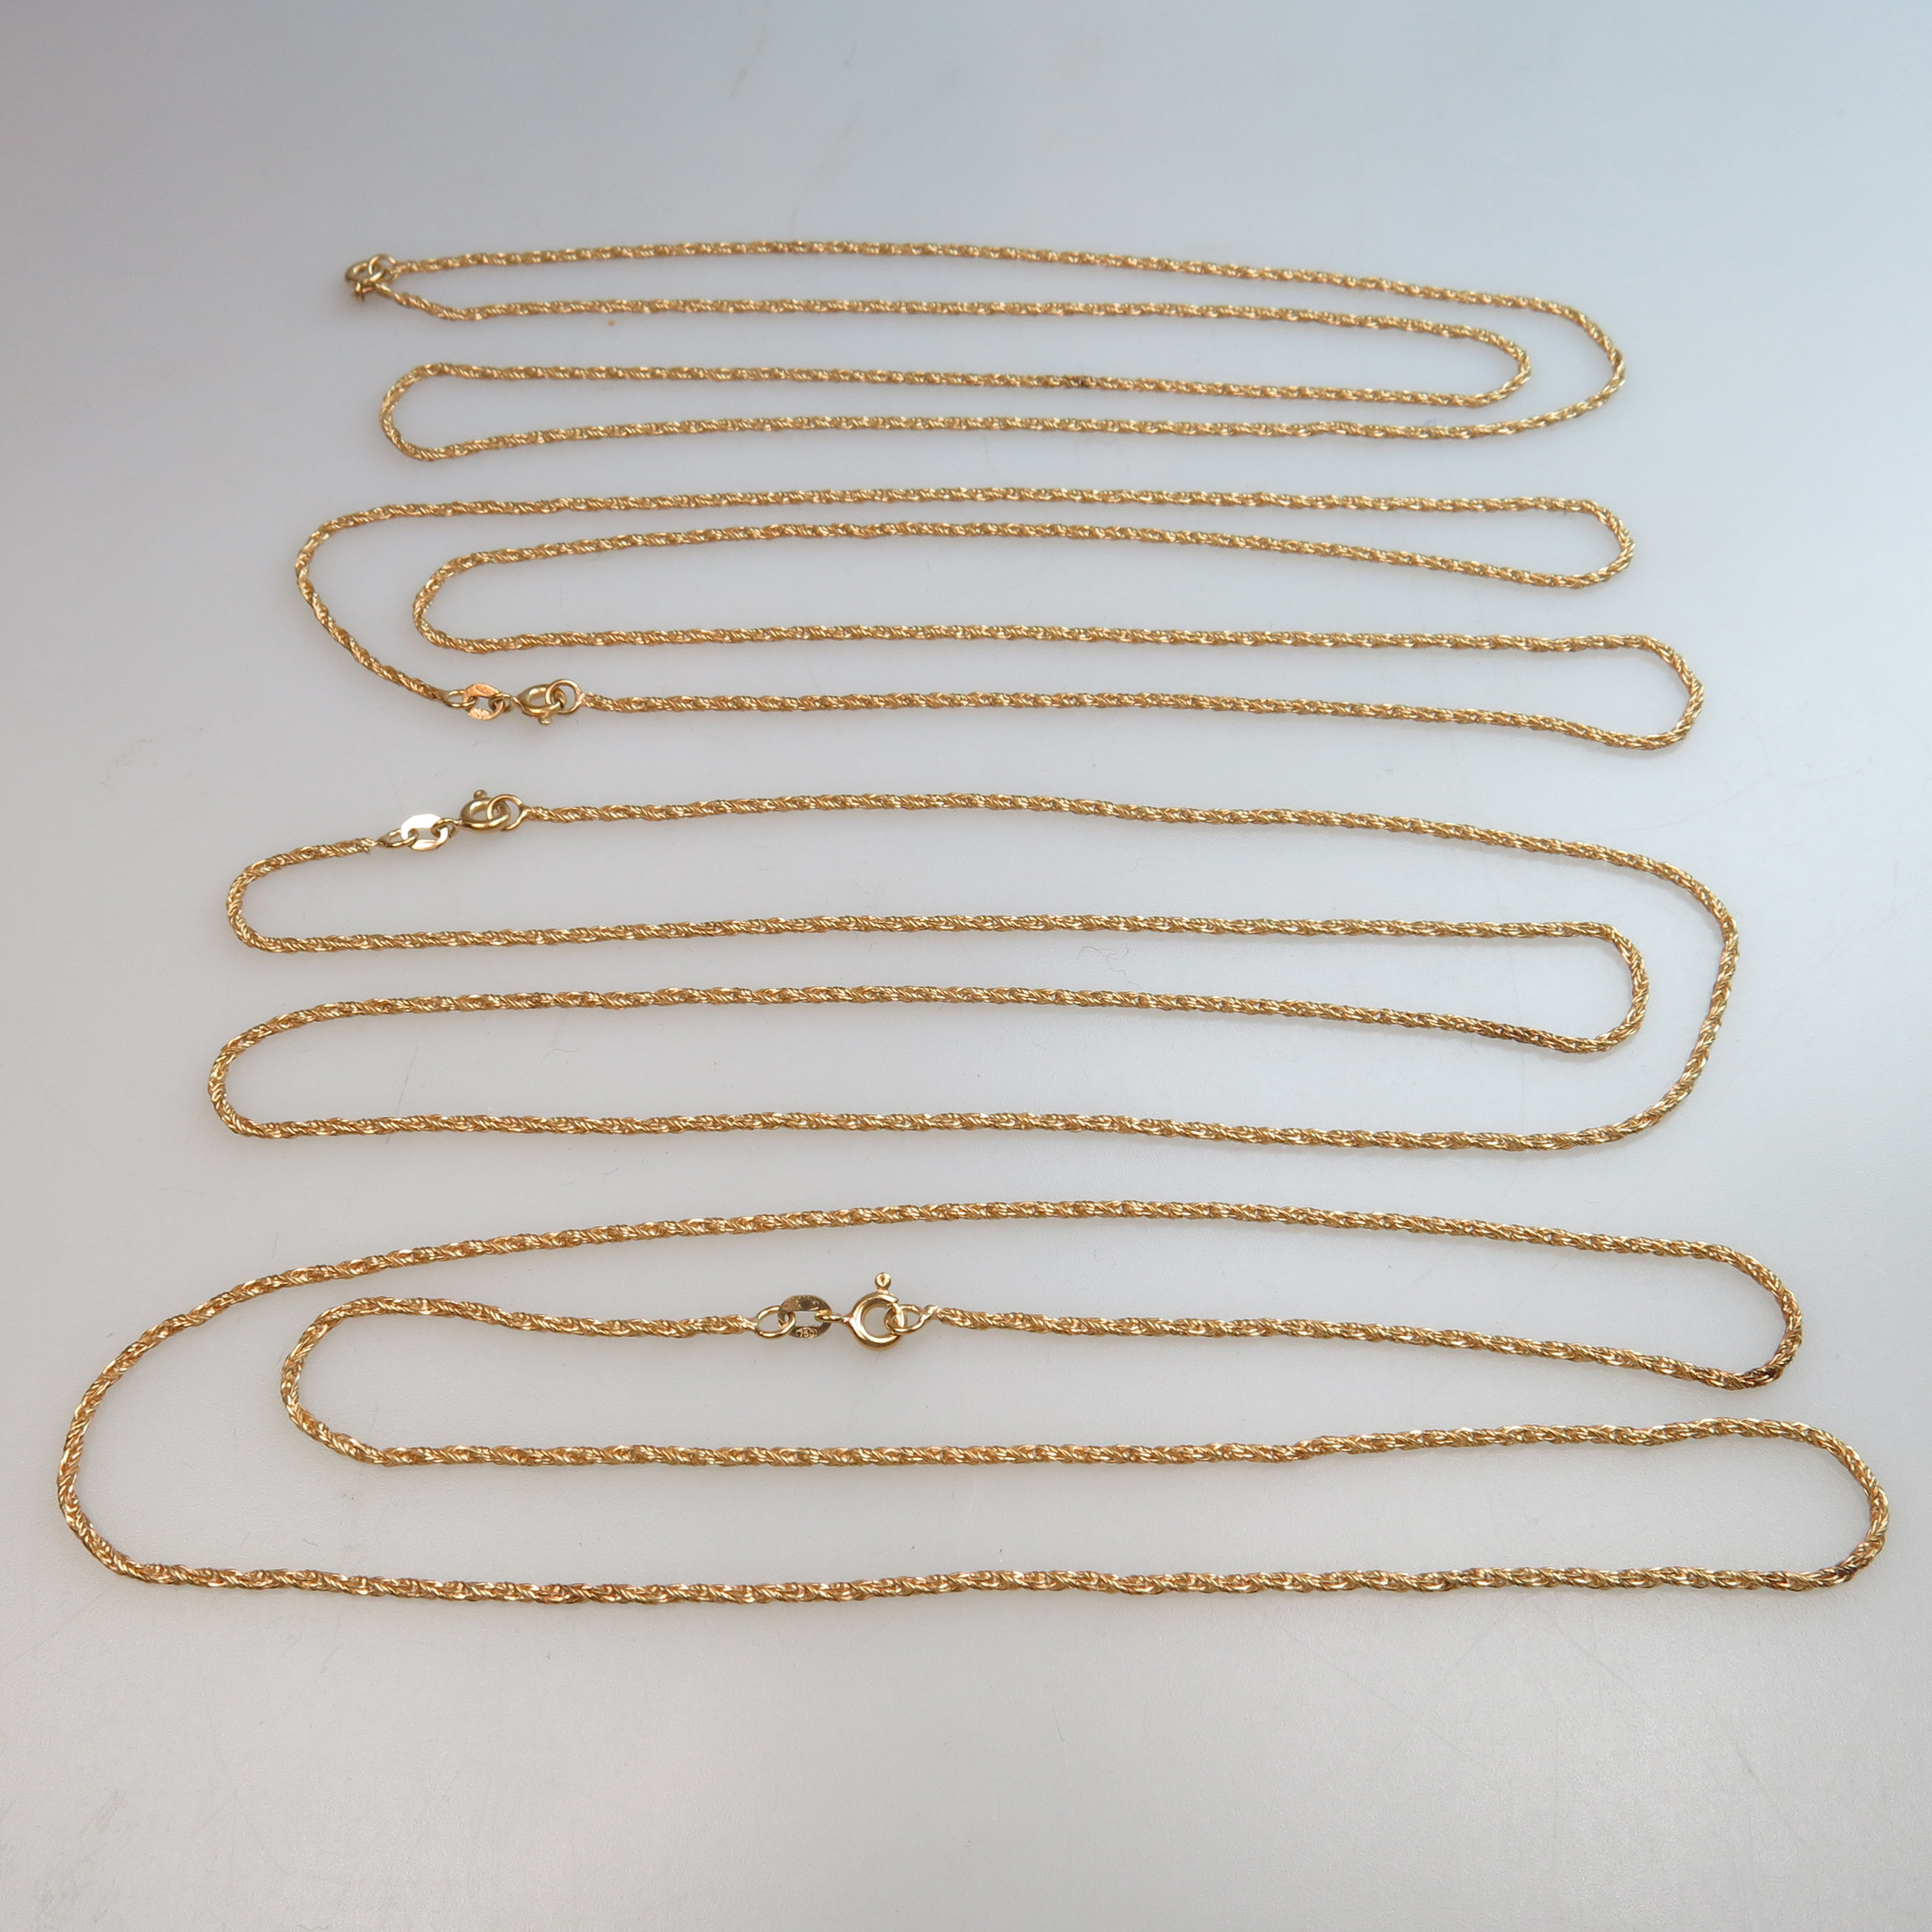 4 x 18k Yellow Gold Rope Necklaces